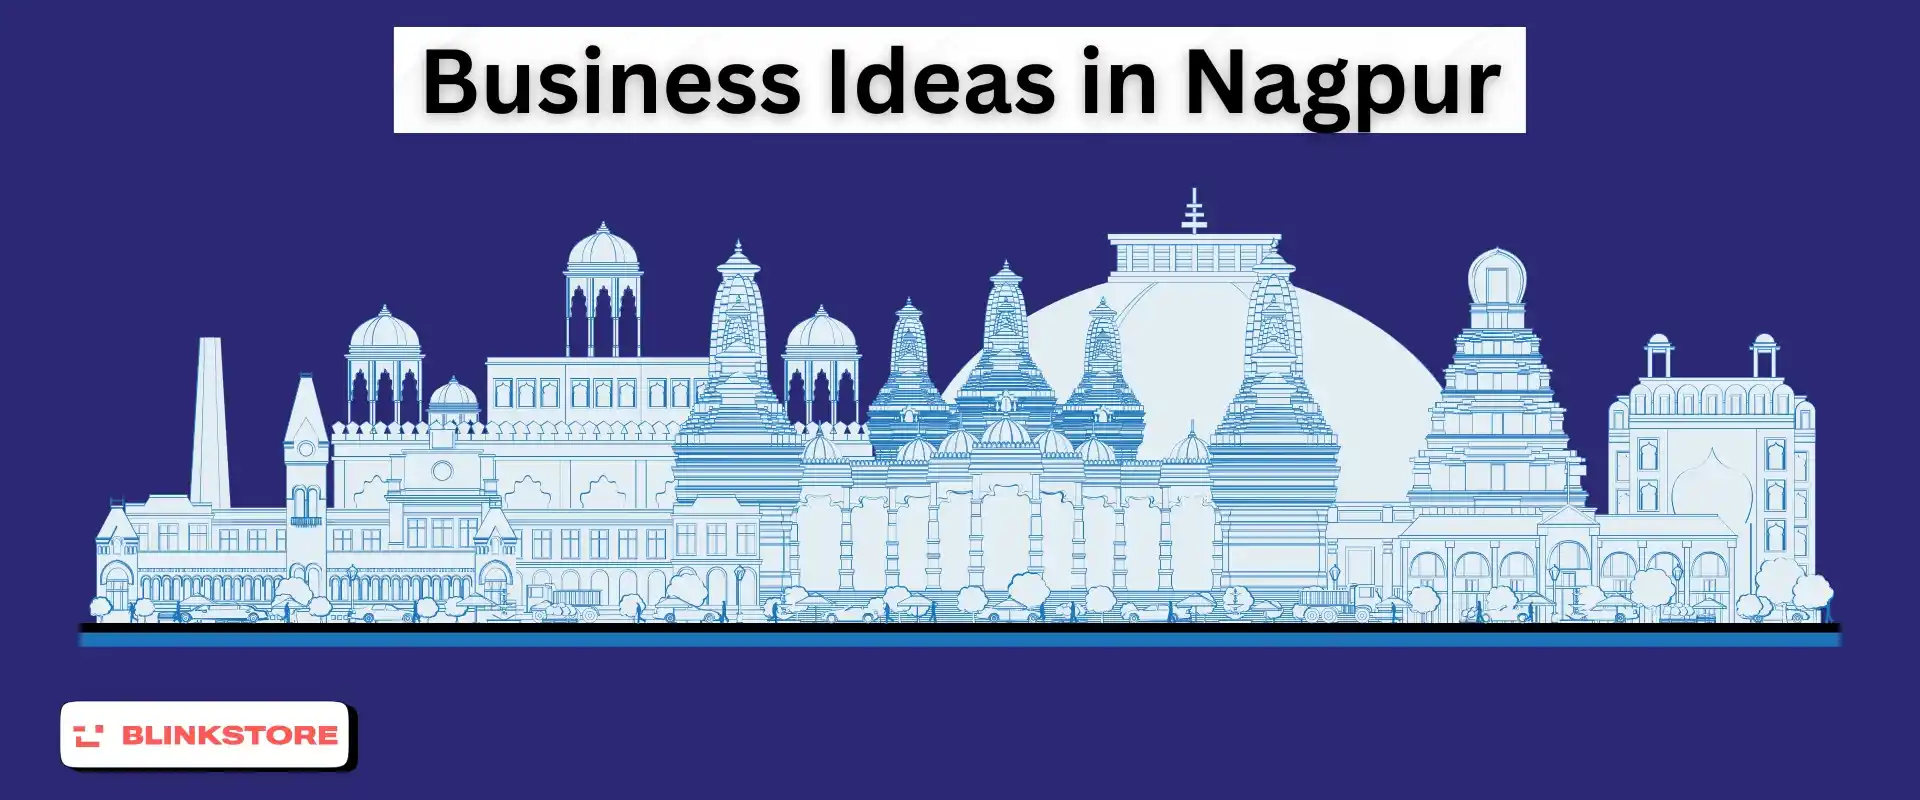 Business Ideas in Nagpur